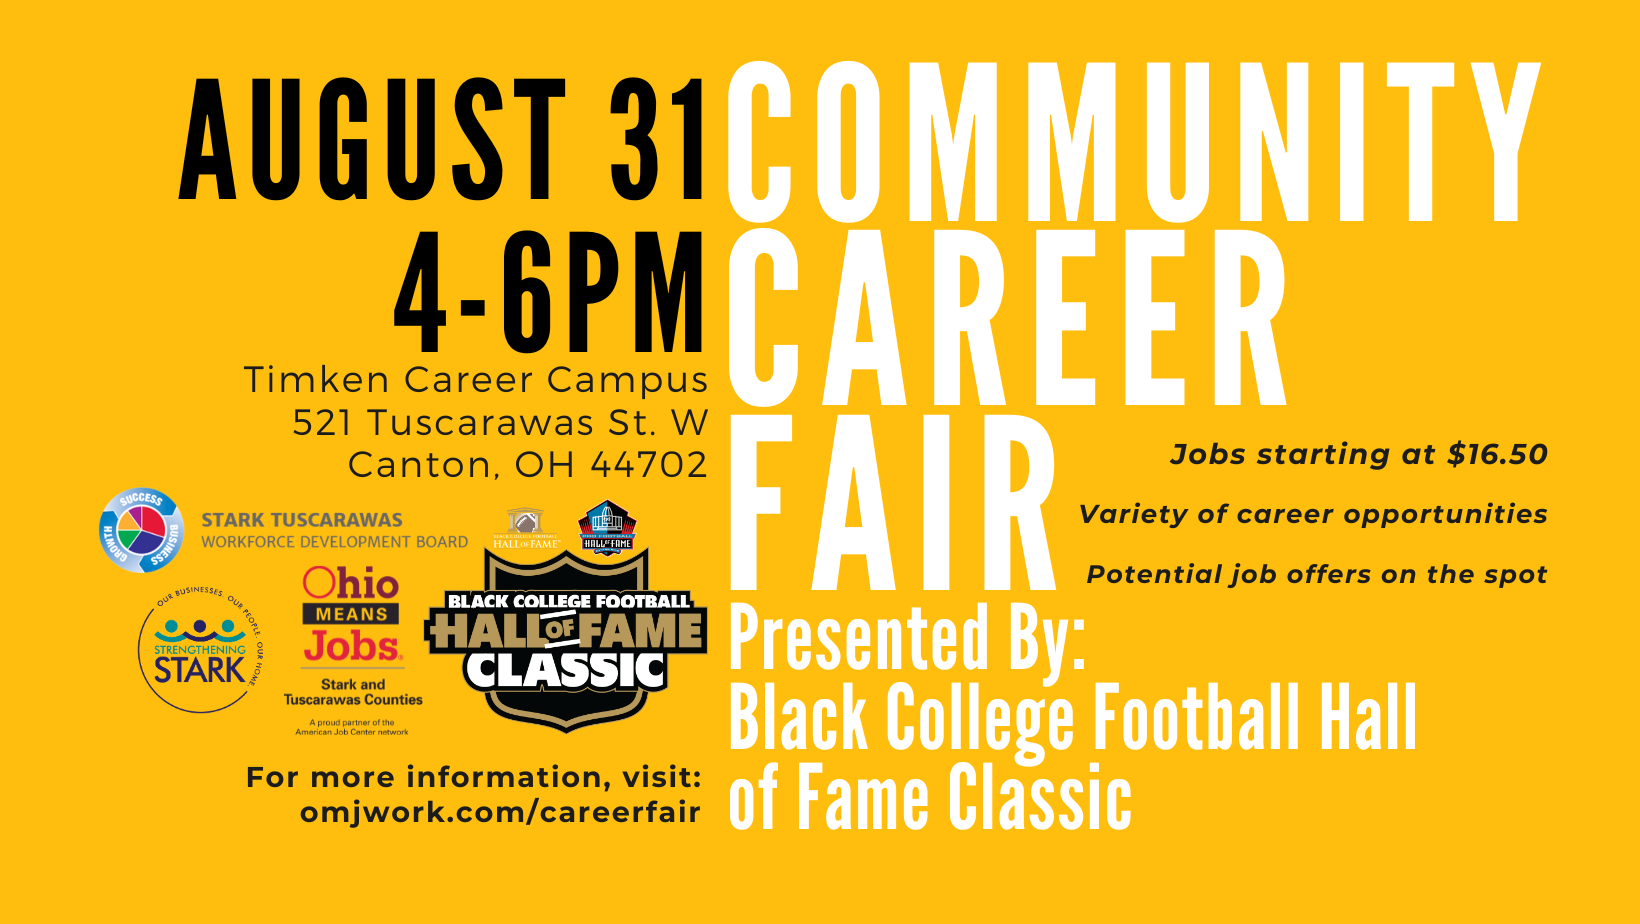 The Career Fair will be held at the Timken Career Campus at 521 Tuscarawas St. W, Canton, OH, 44702.